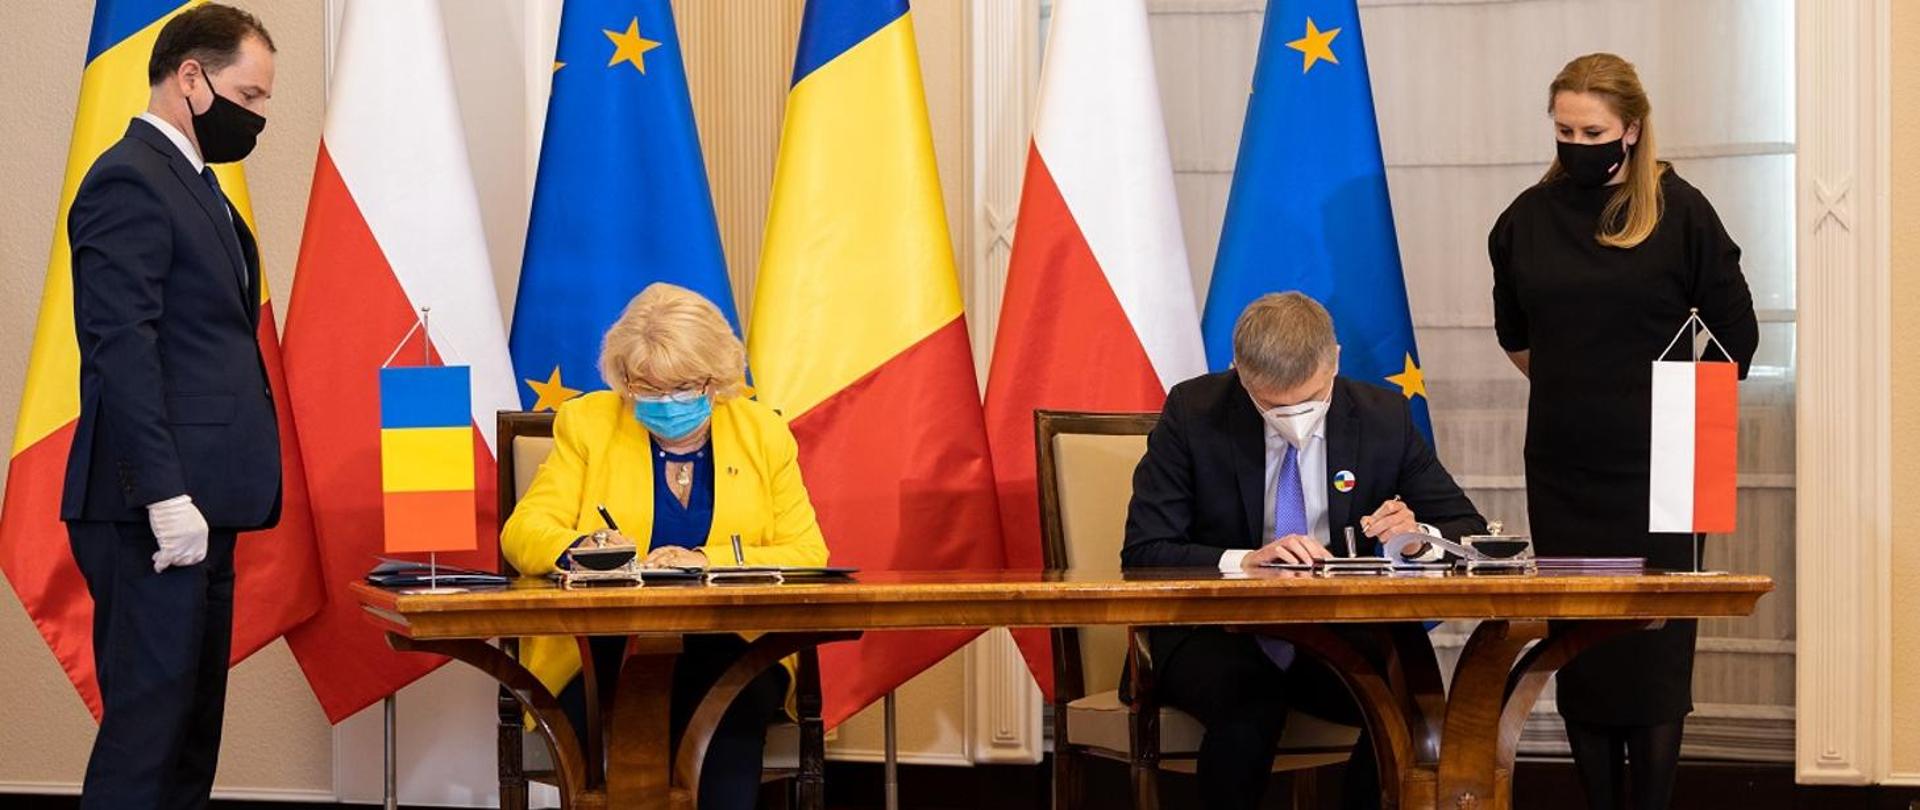 Minister of Development and Technology Piotr Nowak and Secretary of State in the Ministry of Economy of Romania, Daniela Nicolescu, during the signing of an agreement on cooperation in the area of defense industries of both countries 